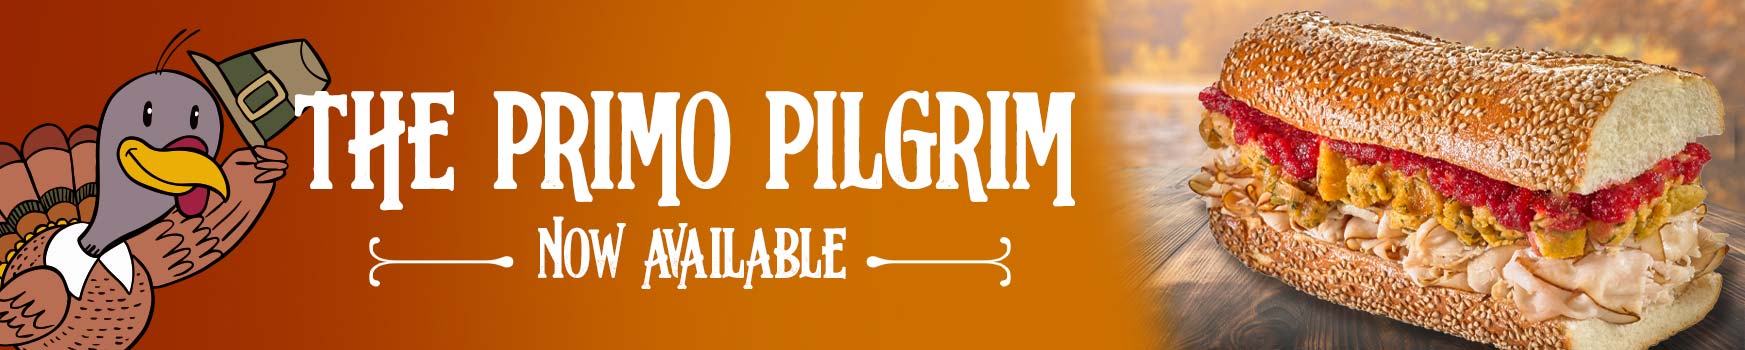 The Primo Pilgrim - Now Available